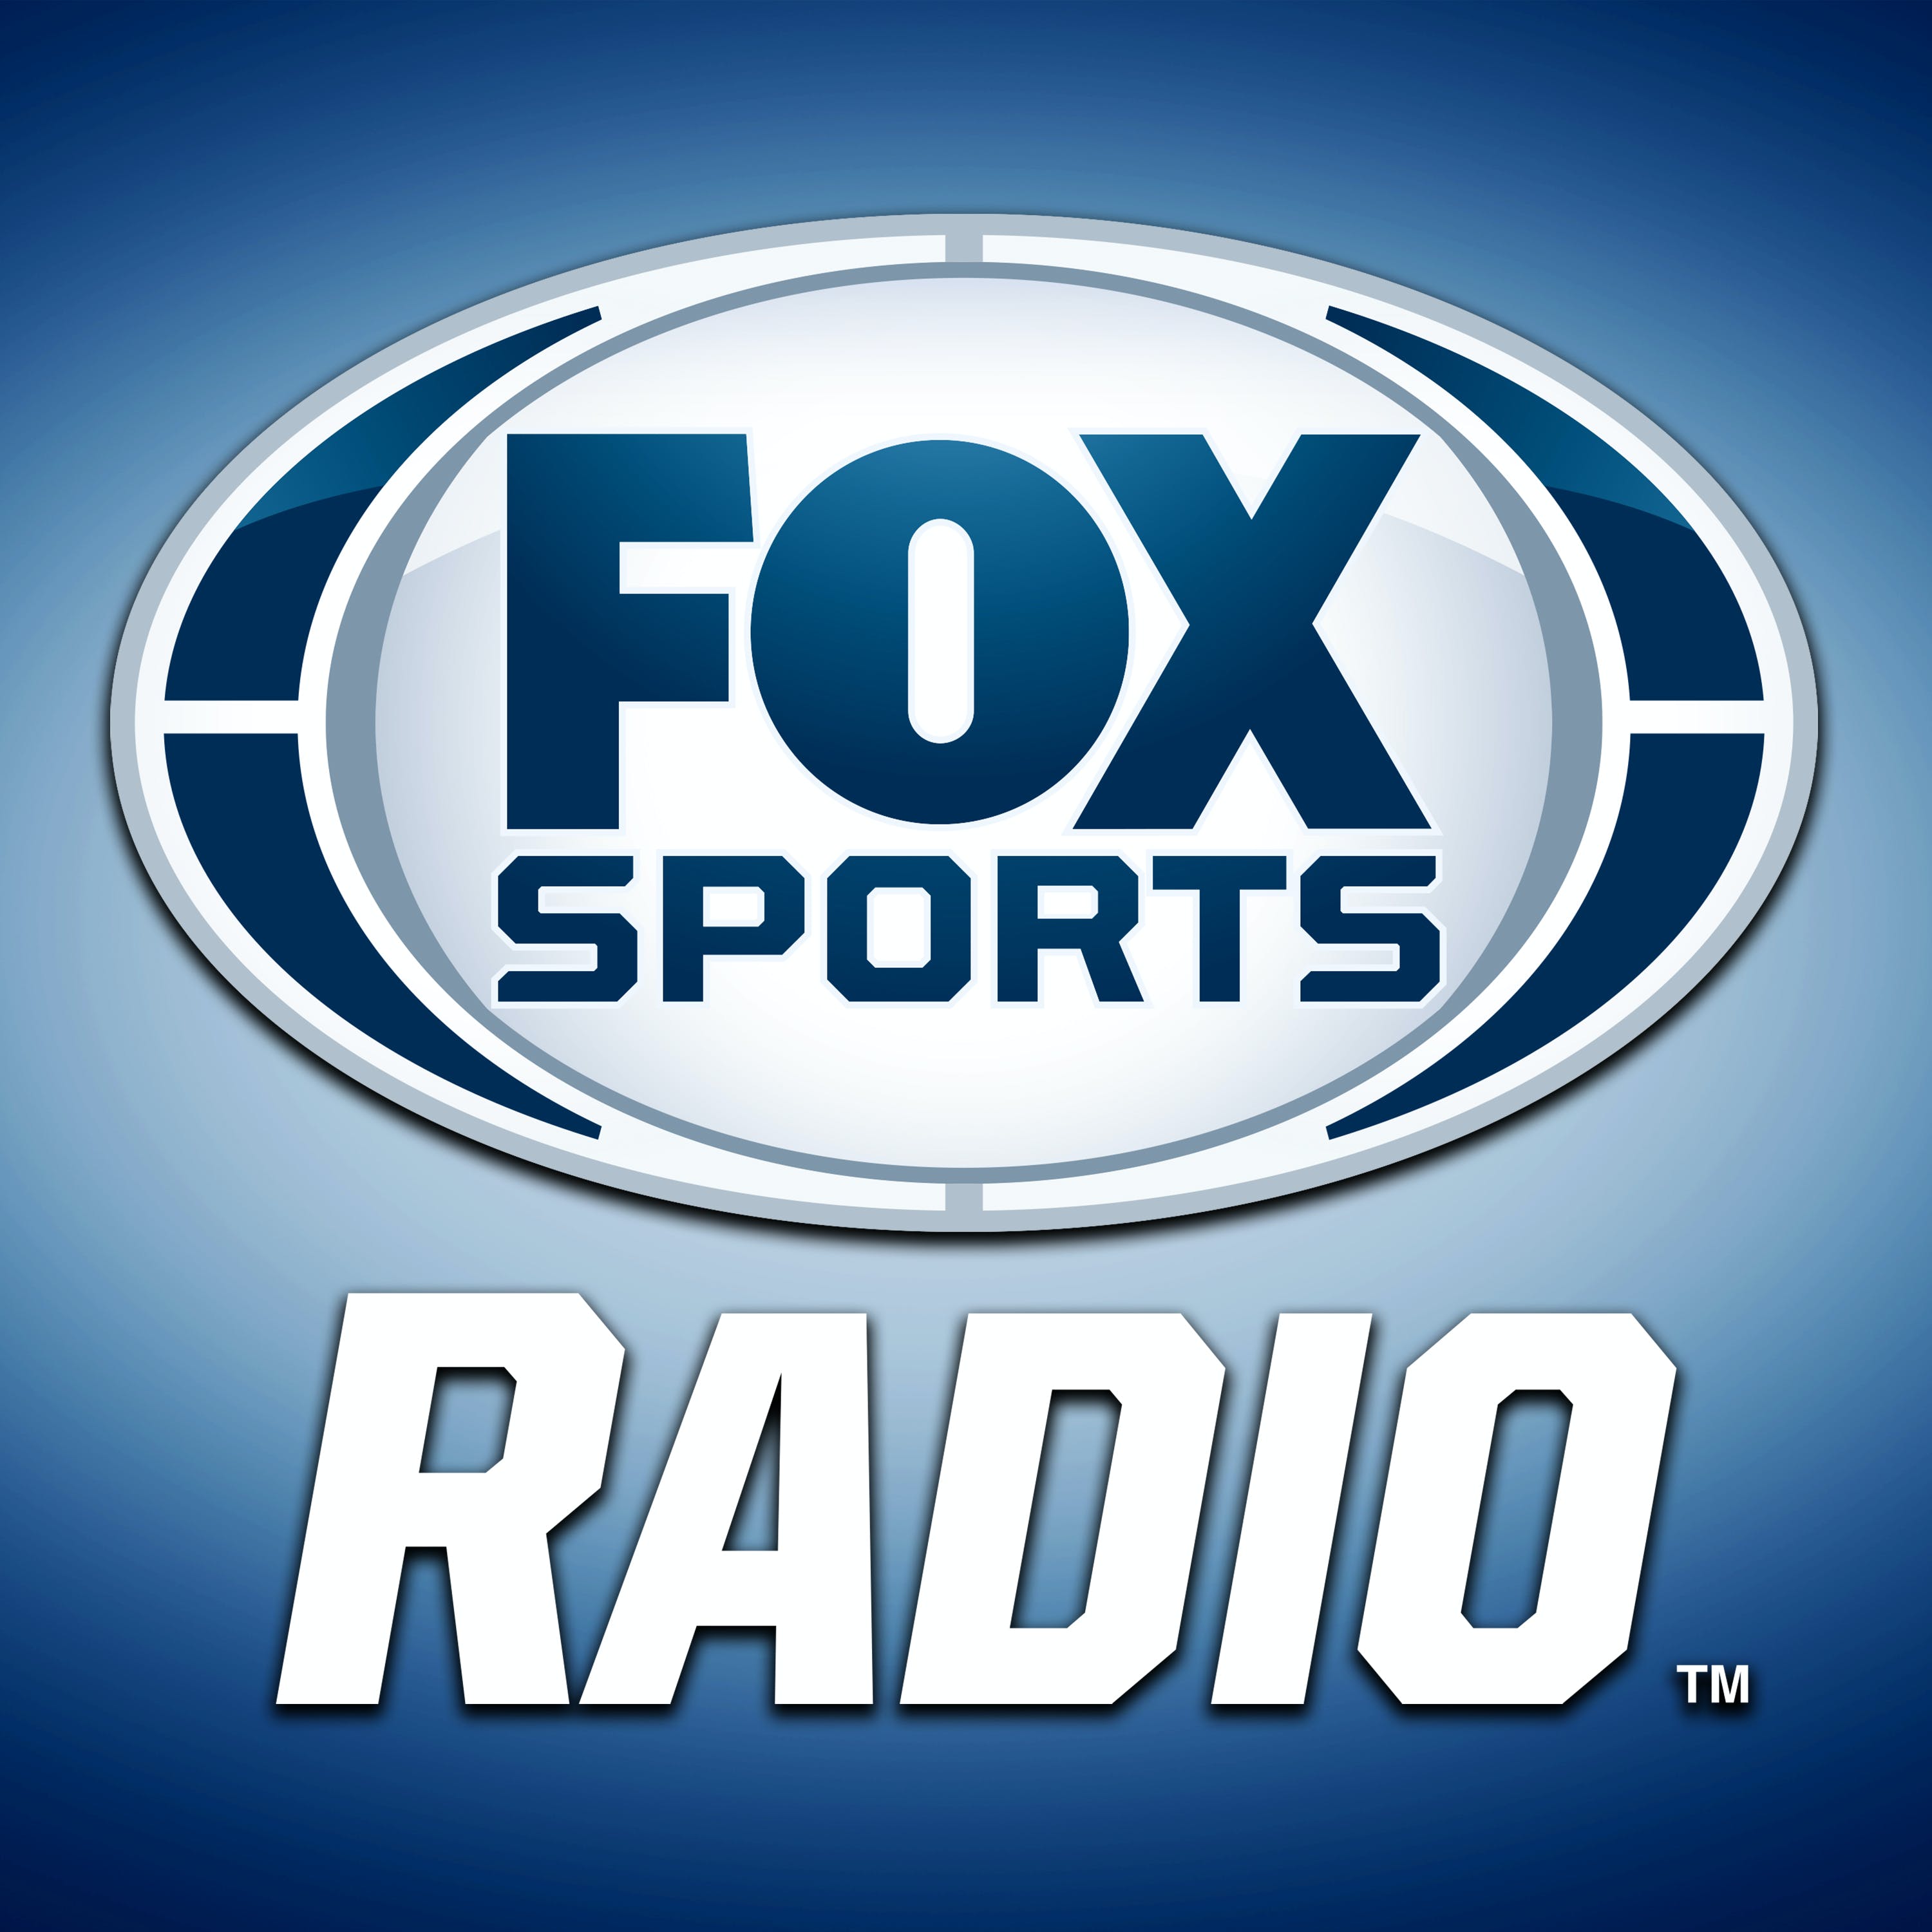 02/06/2021 - FOX Football Saturday with Arnie Spanier and Aaron Torres - Super Bowl Preview